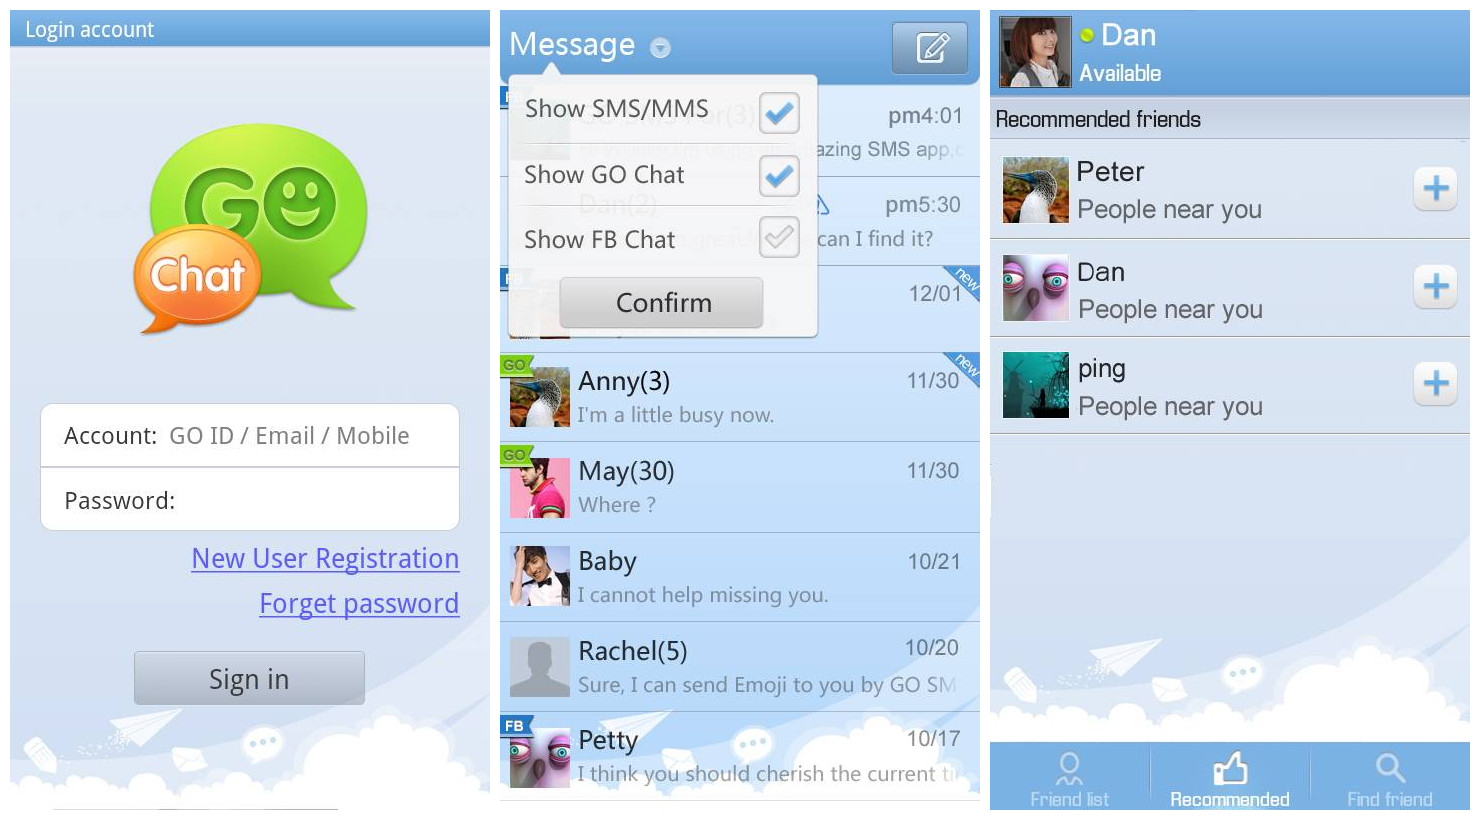 Chat sms go go Learn more